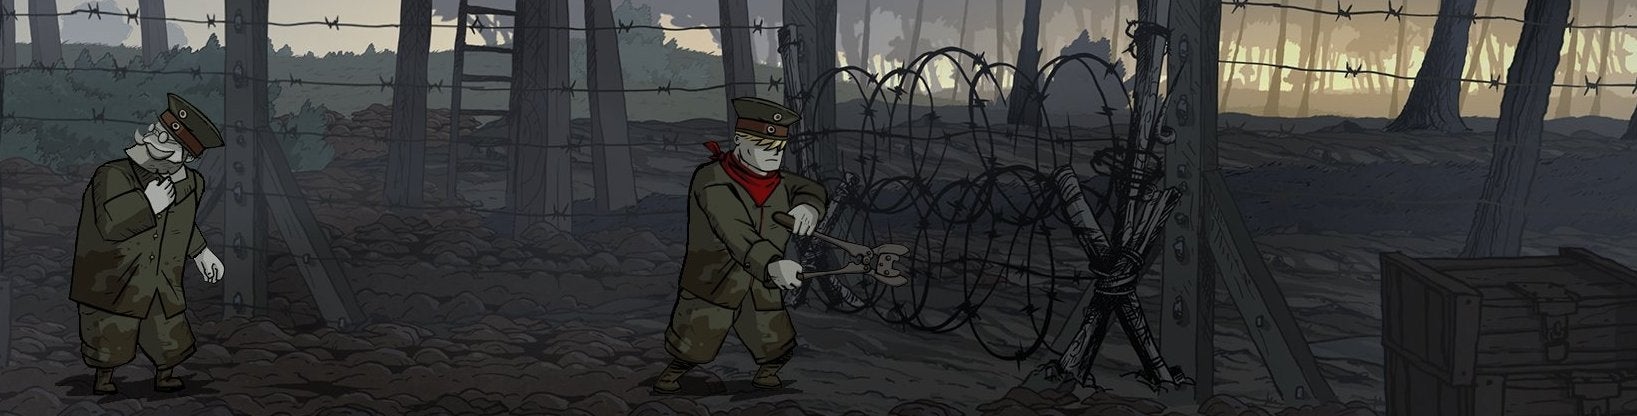 Image for Valiant Hearts: The Great War review